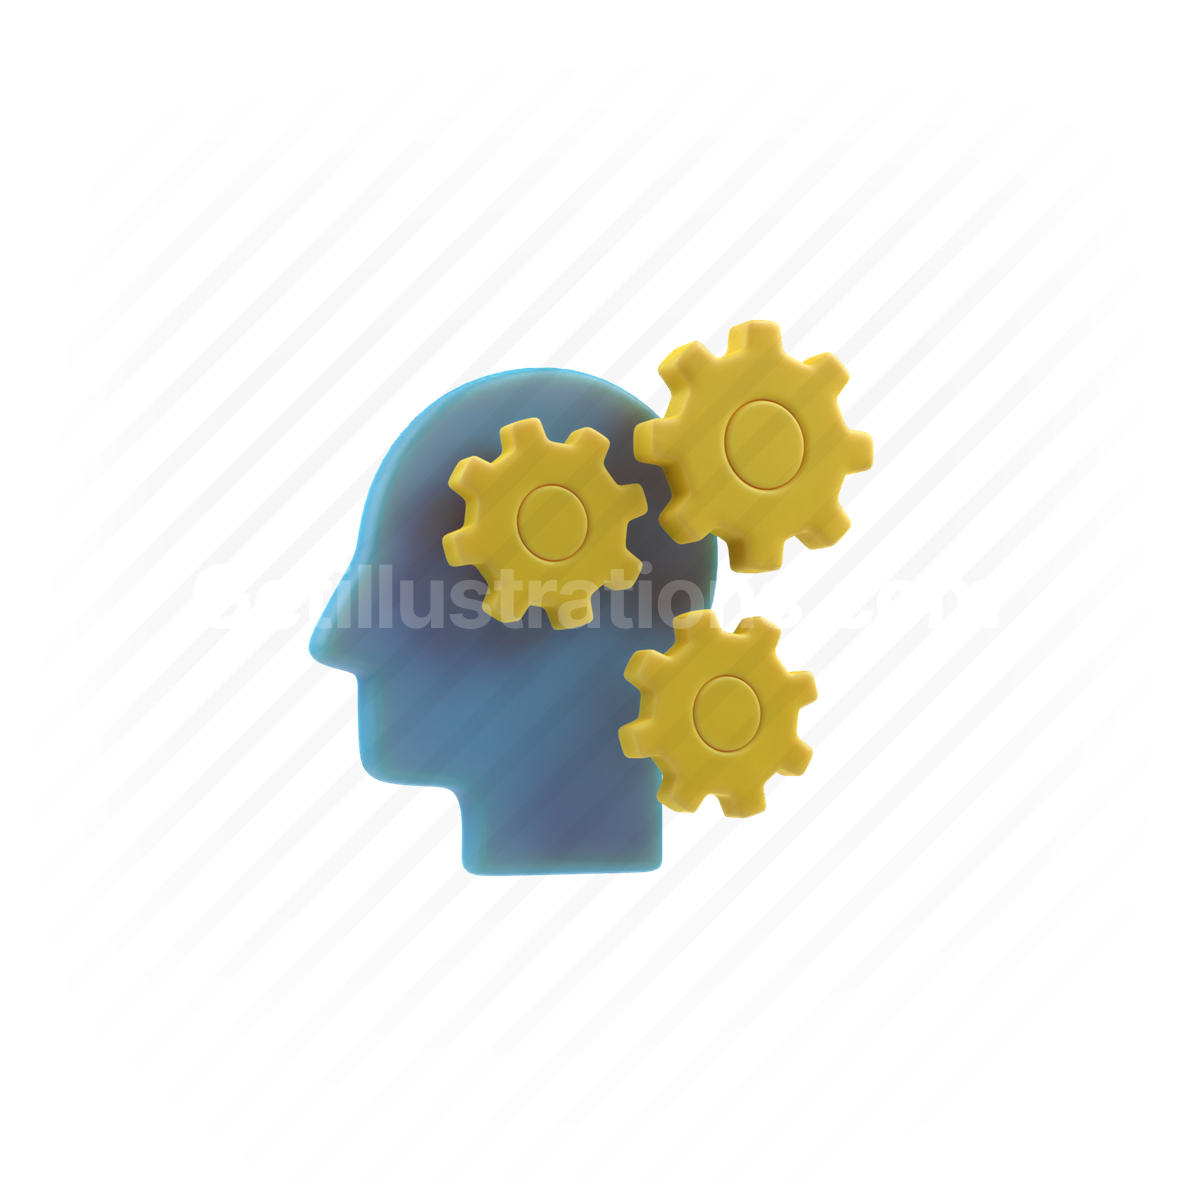 options, preferences, cogwheel, gears, thought, mind, head